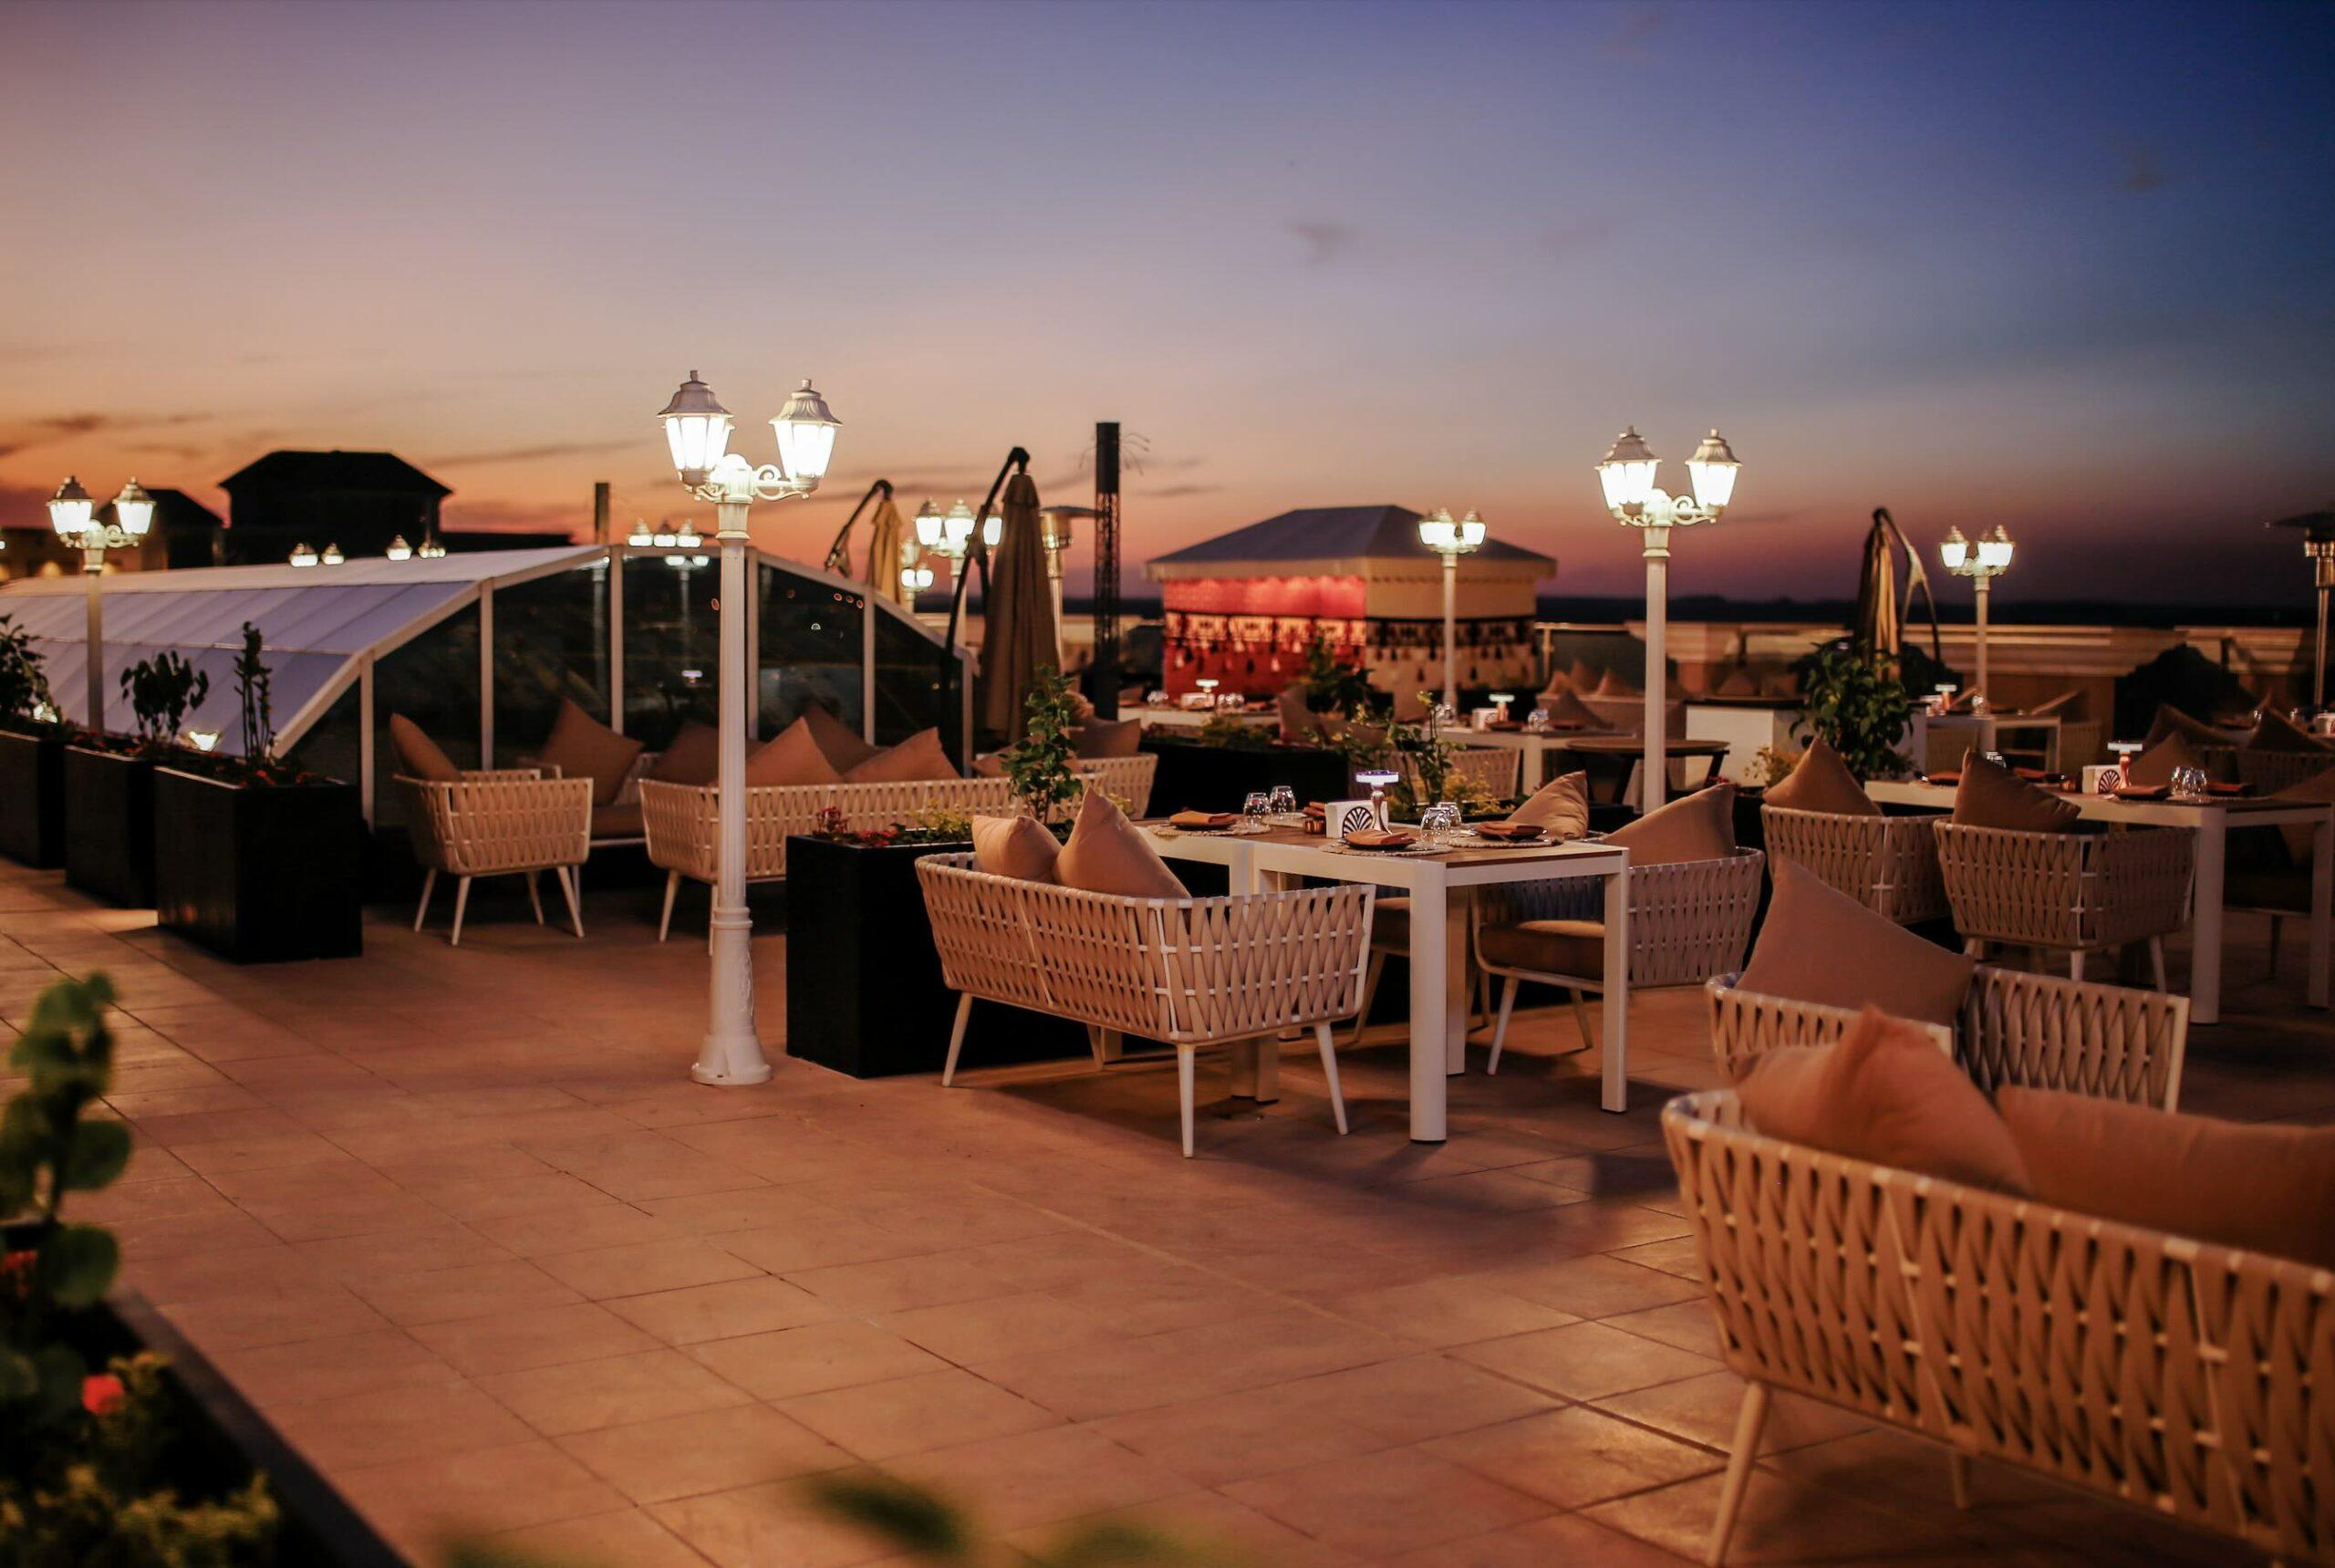 A new rooftop eatery has debuted at Radisson Hotel Riyadh Airport